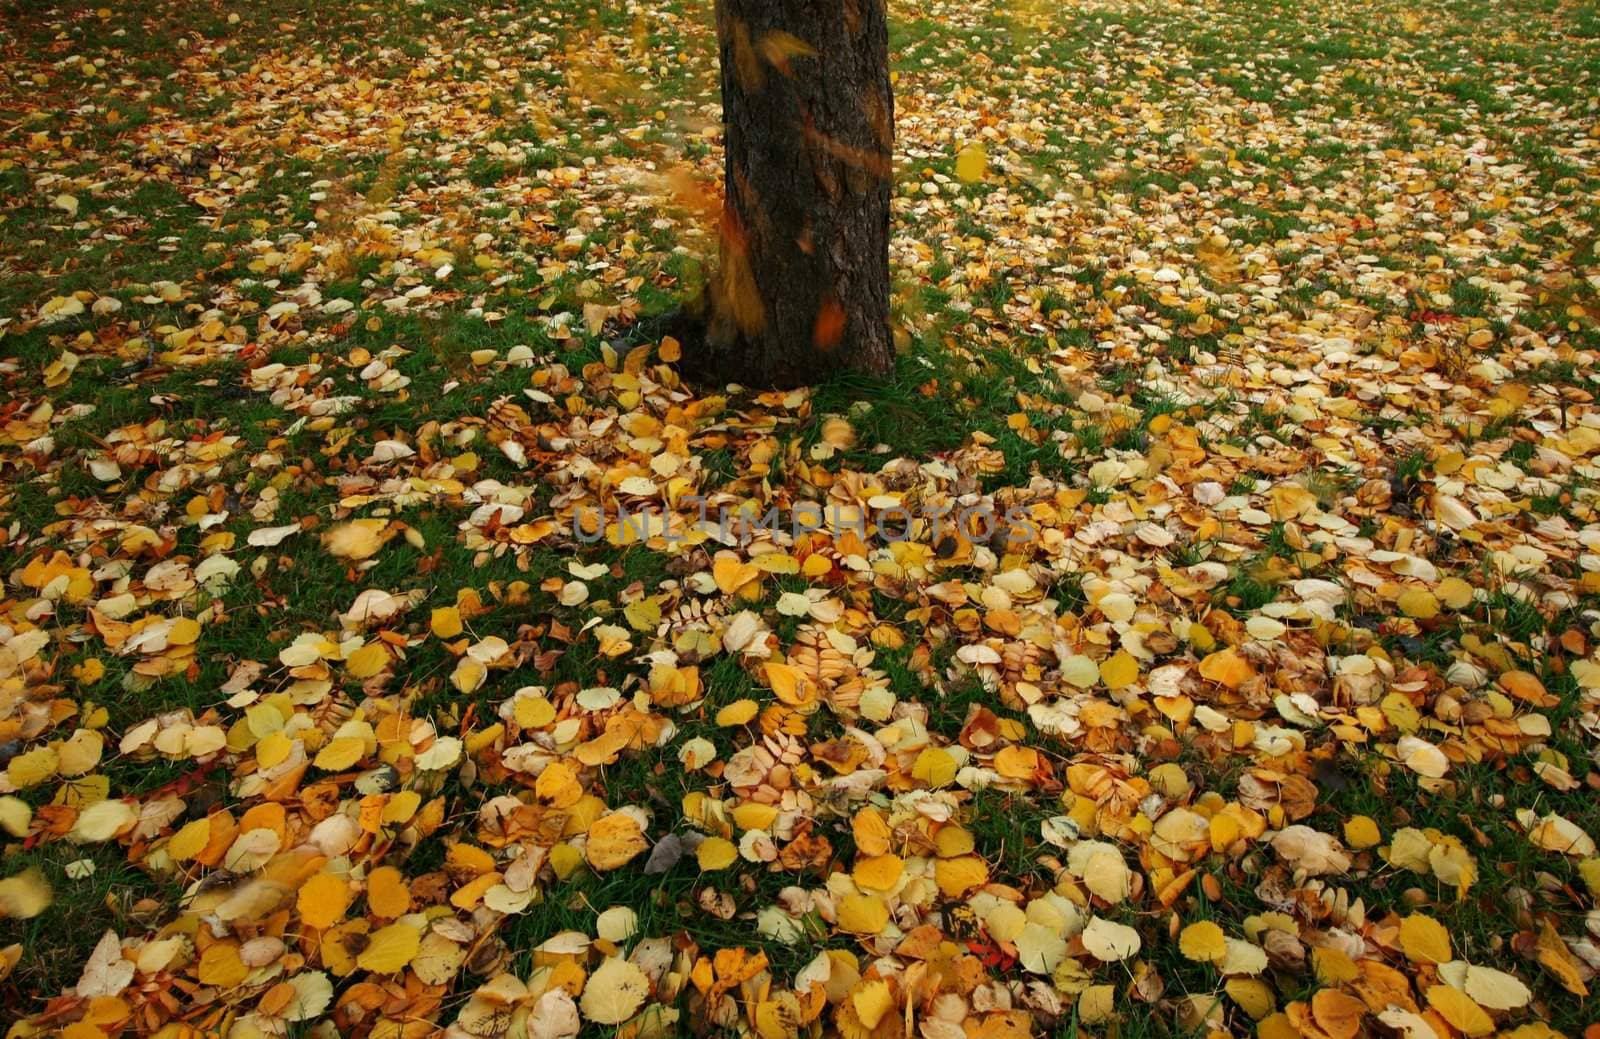 Seasonal image of colorful autumn leaves falling to the ground. Movement of leaves is motion blurred